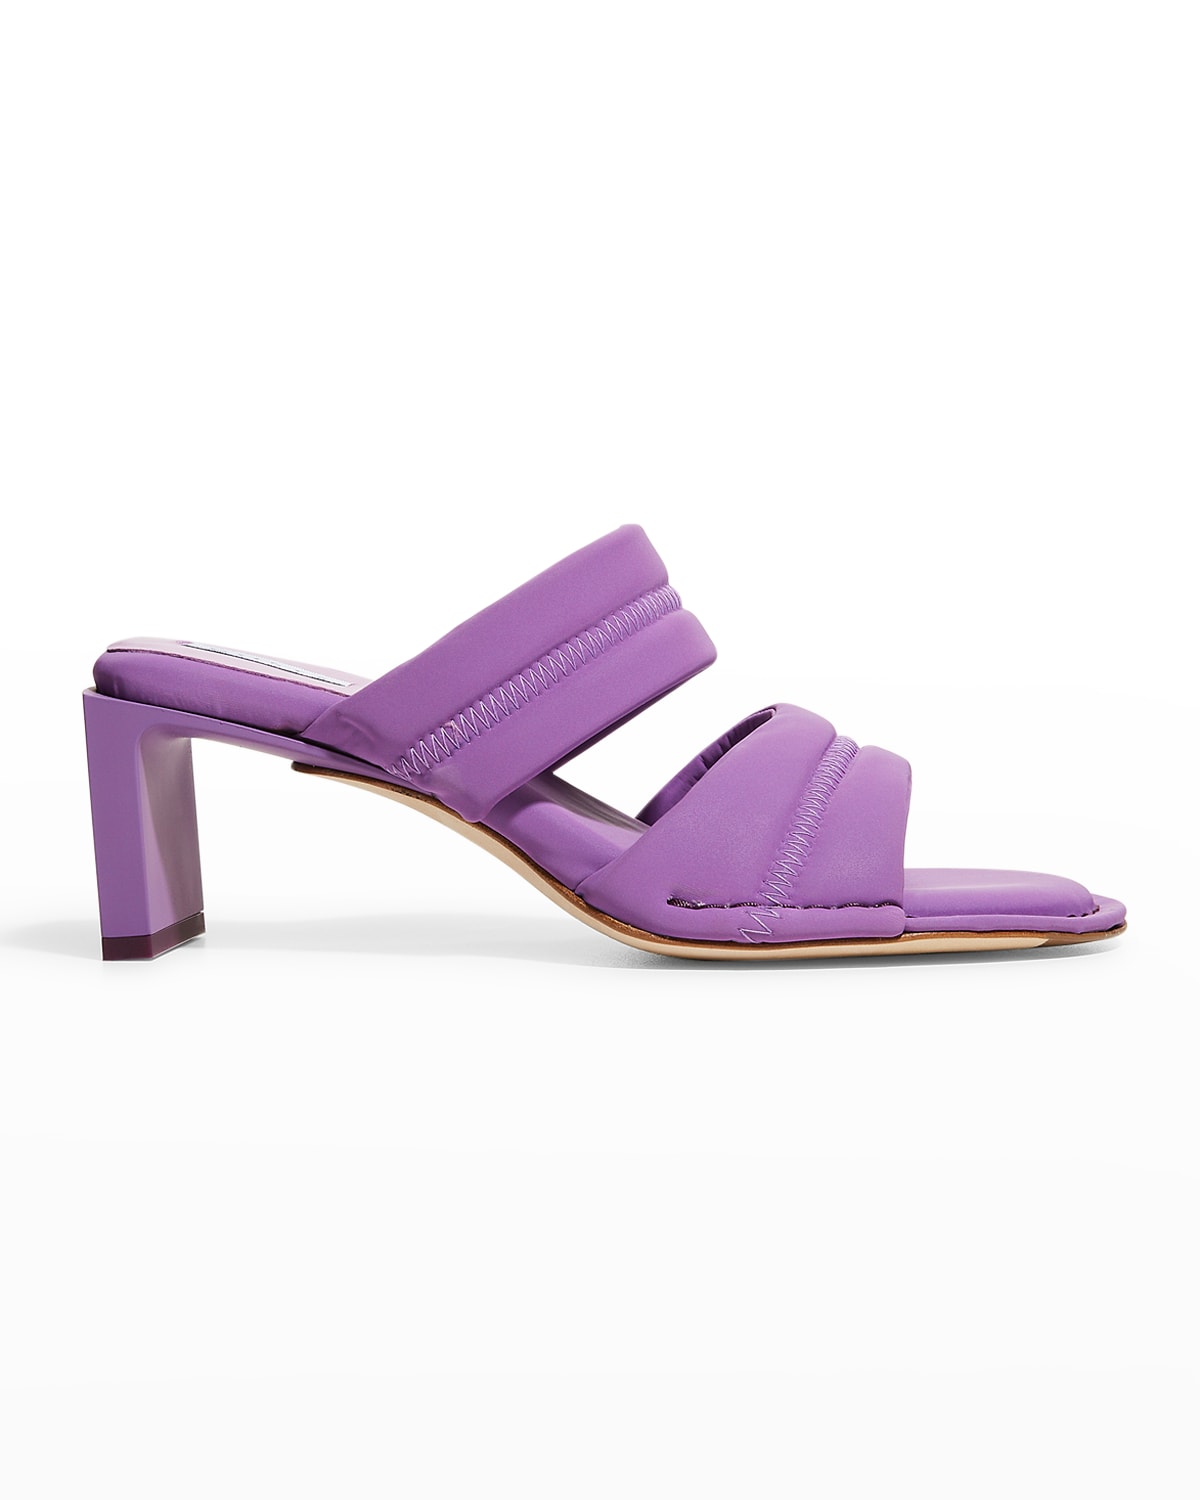 Women's MIISTA Shoes On Sale, Up To 70% Off | ModeSens